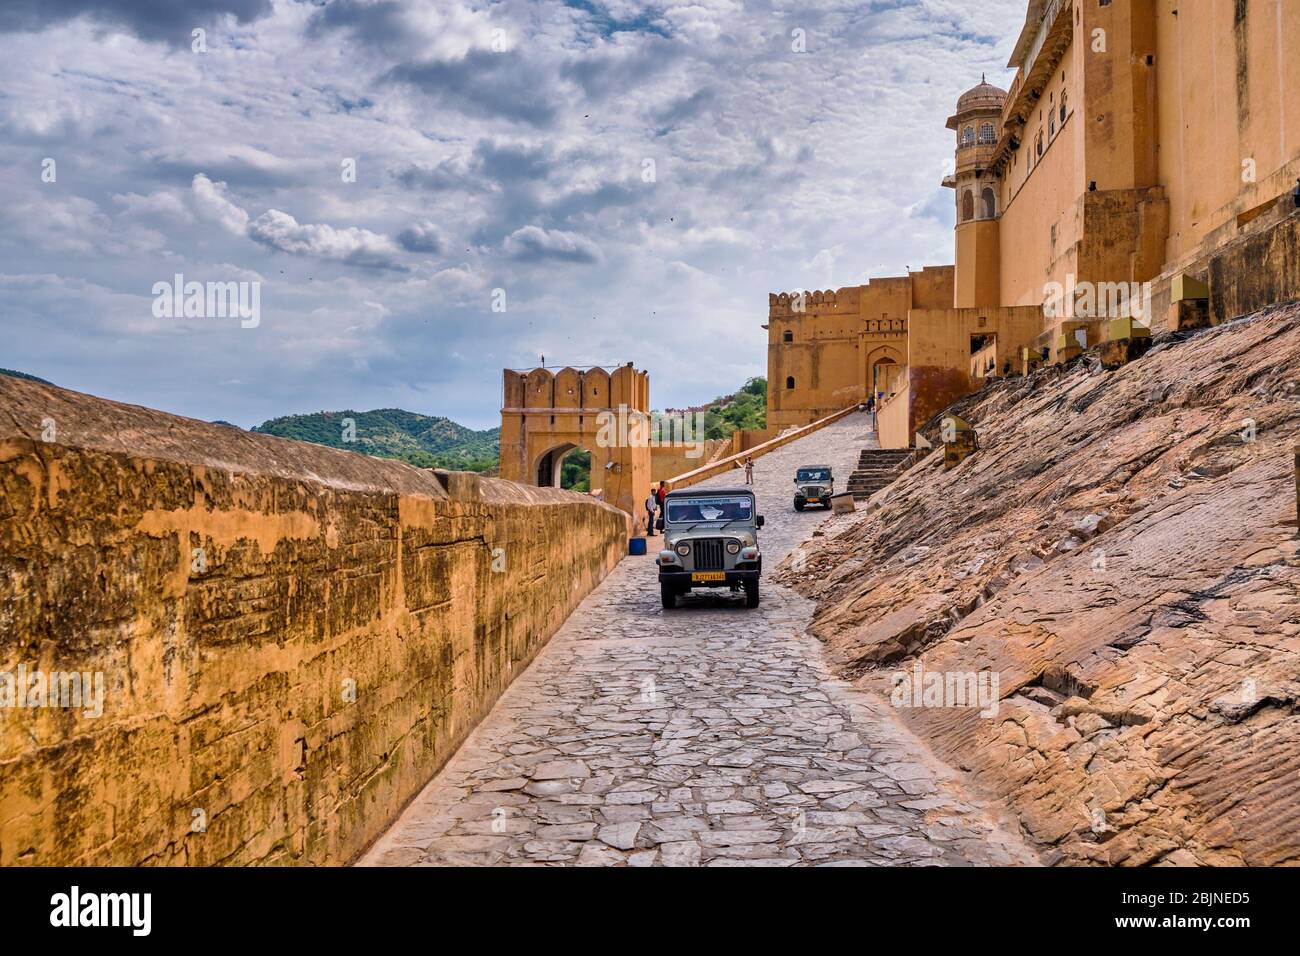 Jaipur, Rajasthan / India - September 28, 2019: Mahindra jeeps transporting tourists to the royal palace at the Amer Fort in Jaipur, India Stock Photo